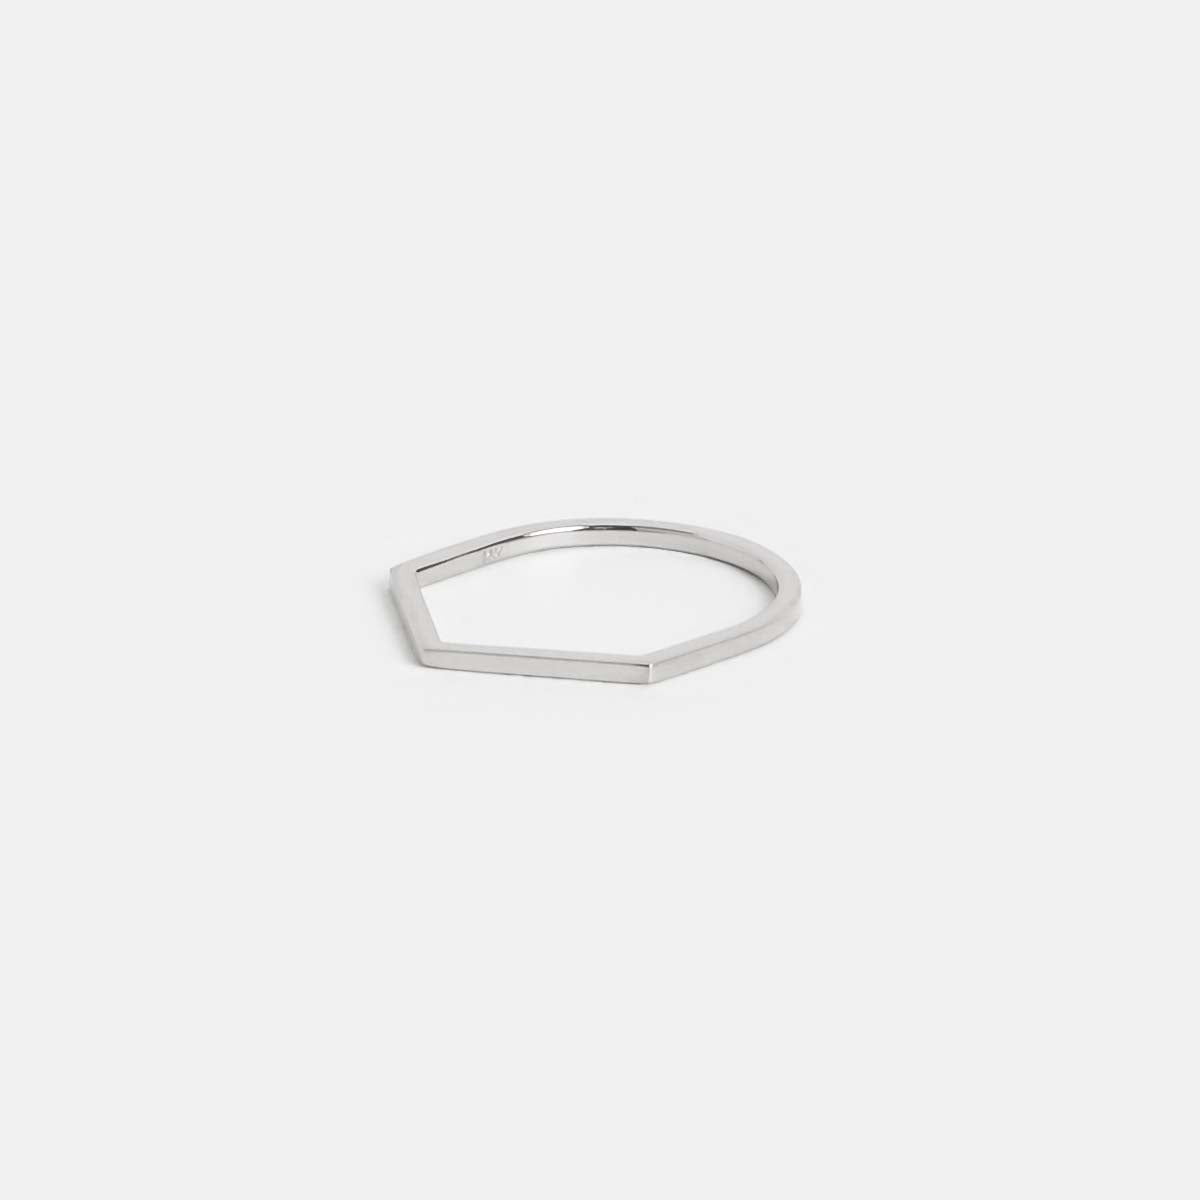  Namas Cool Ring in Sterling Silver by SHW Fine Jewelry NYC